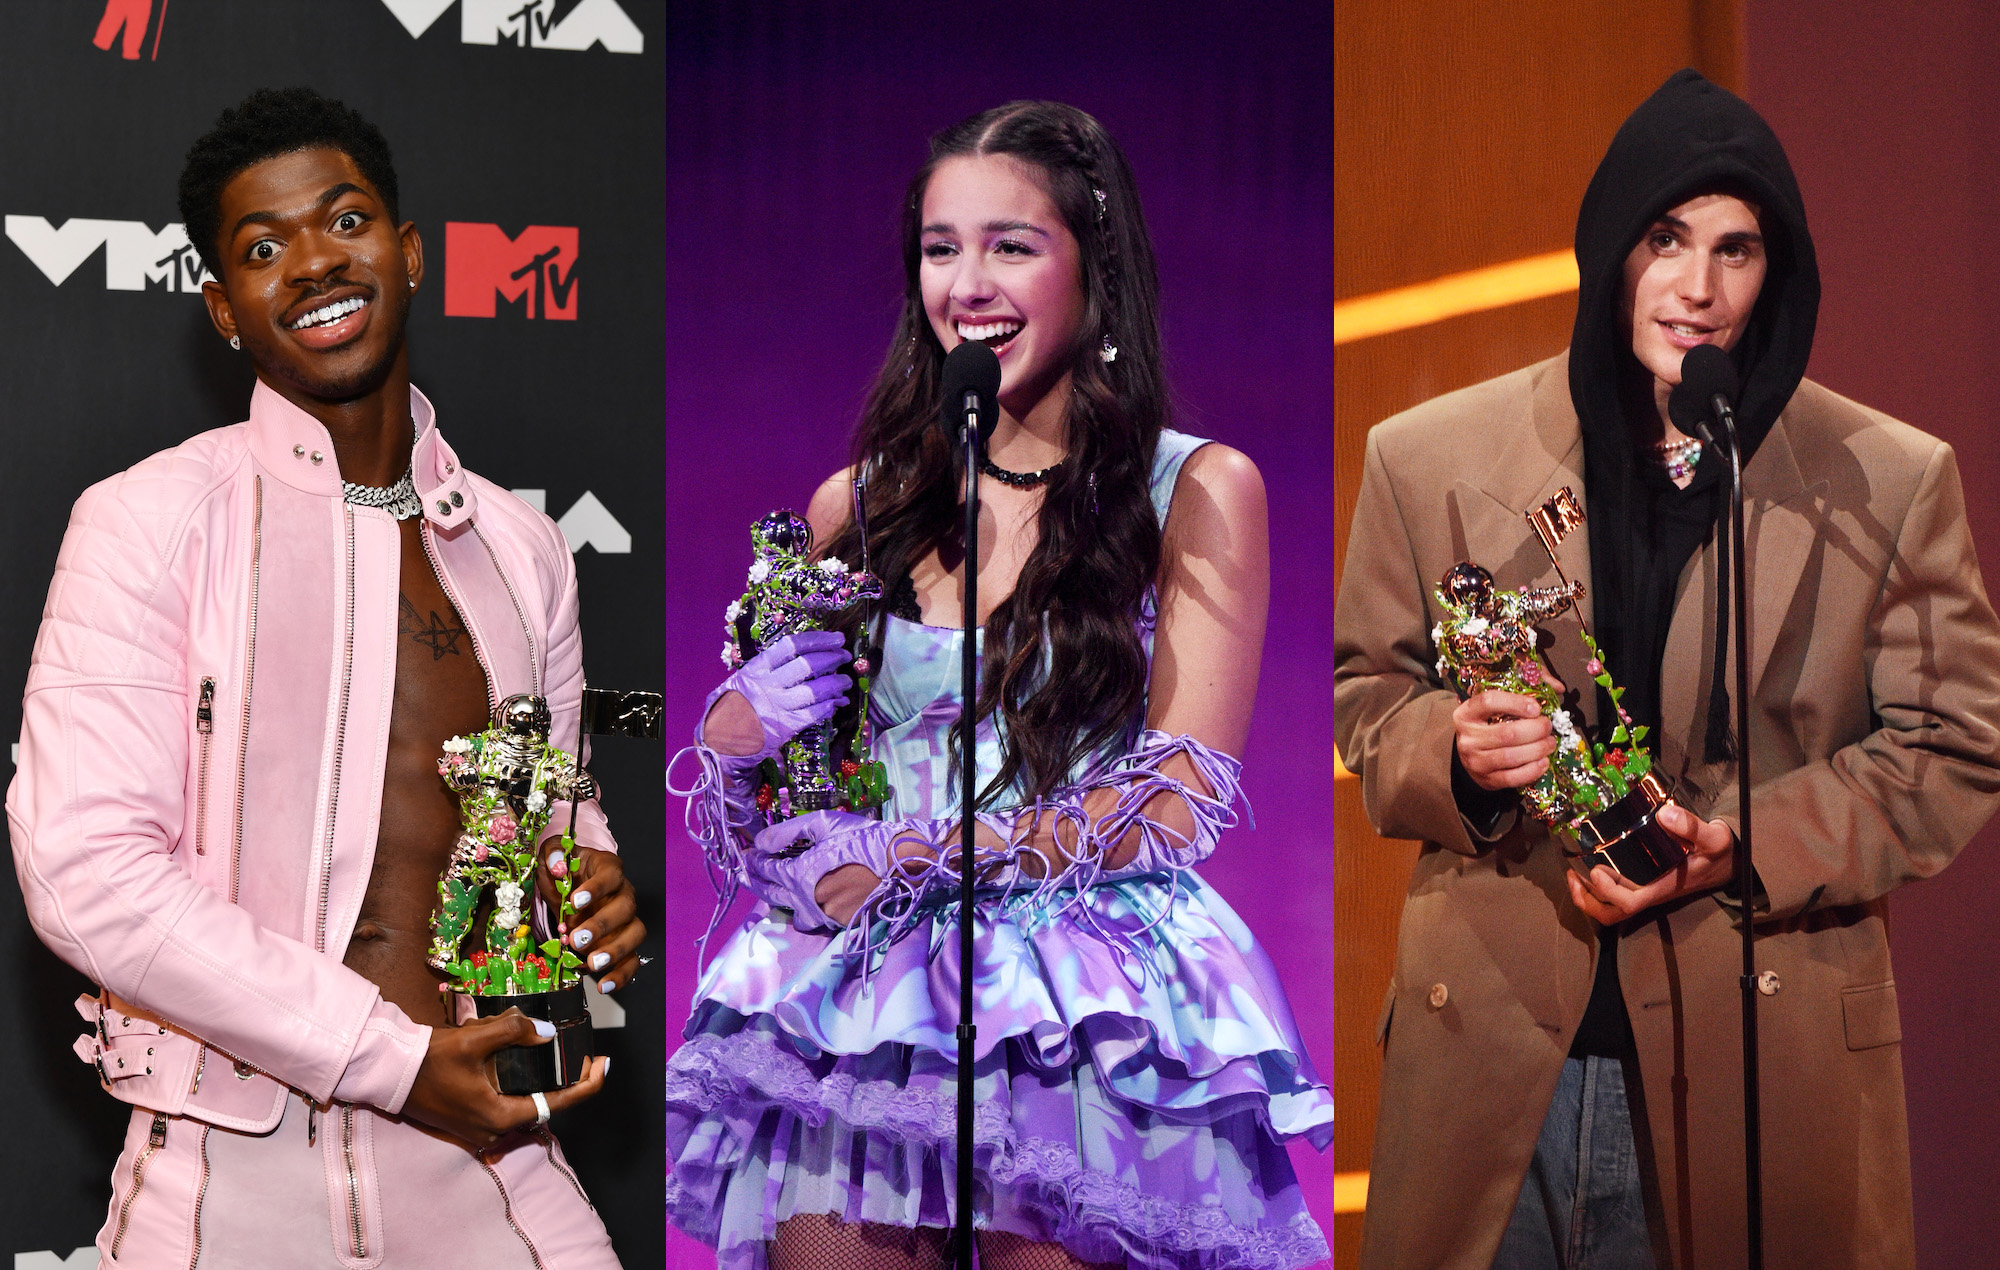 Here are all the winners from the MTV VMAs 2021